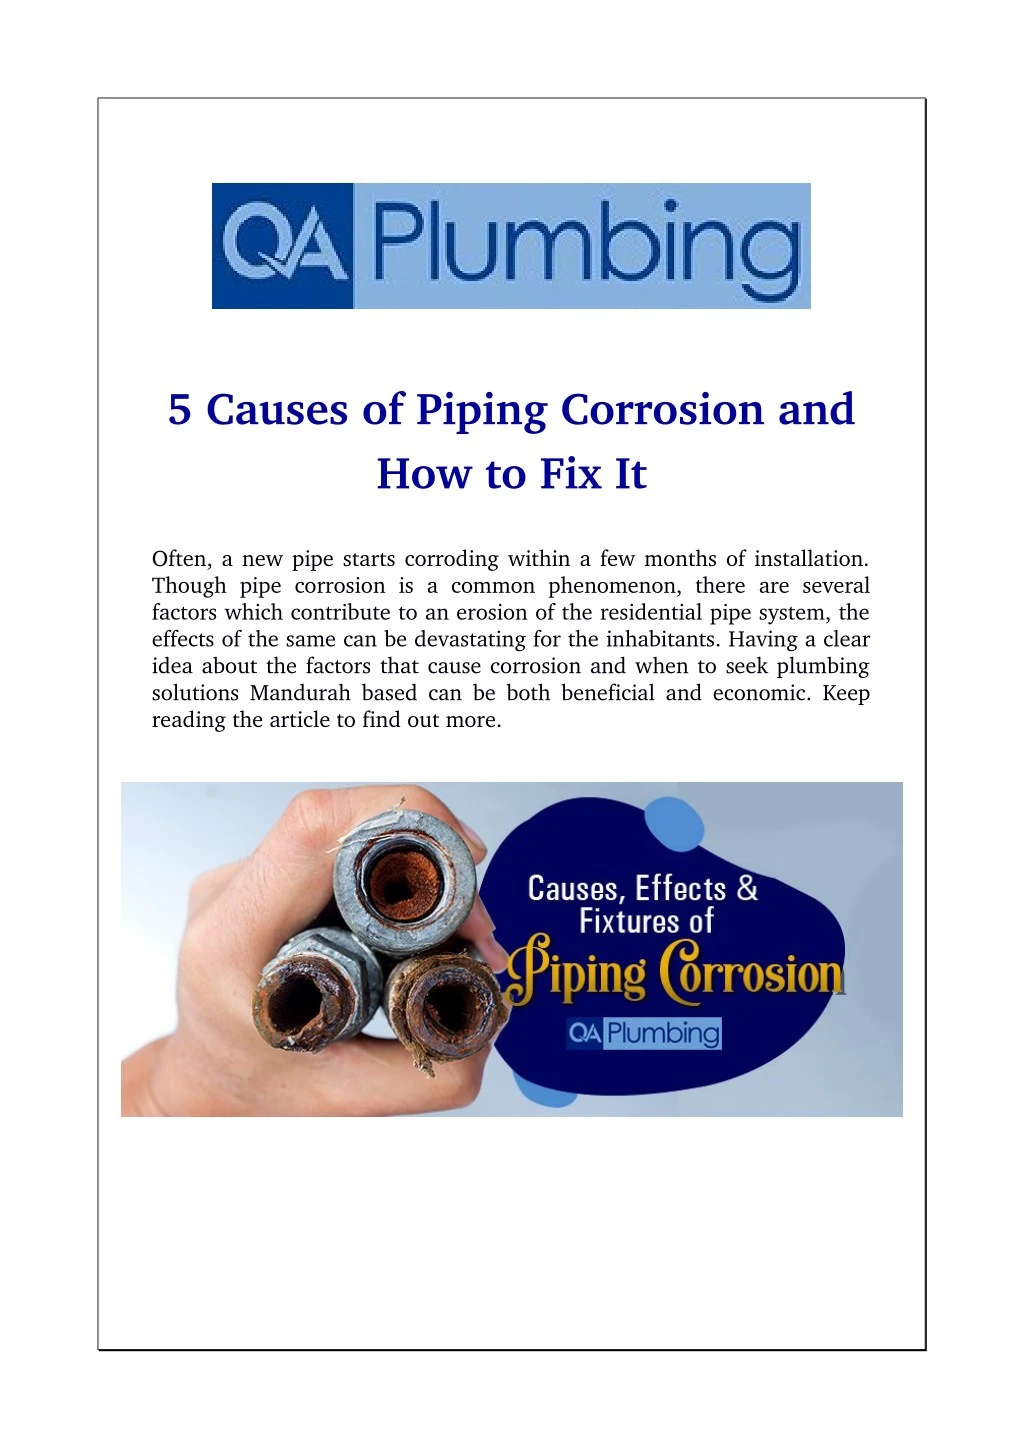 5 causes of piping corrosion and how to fix it